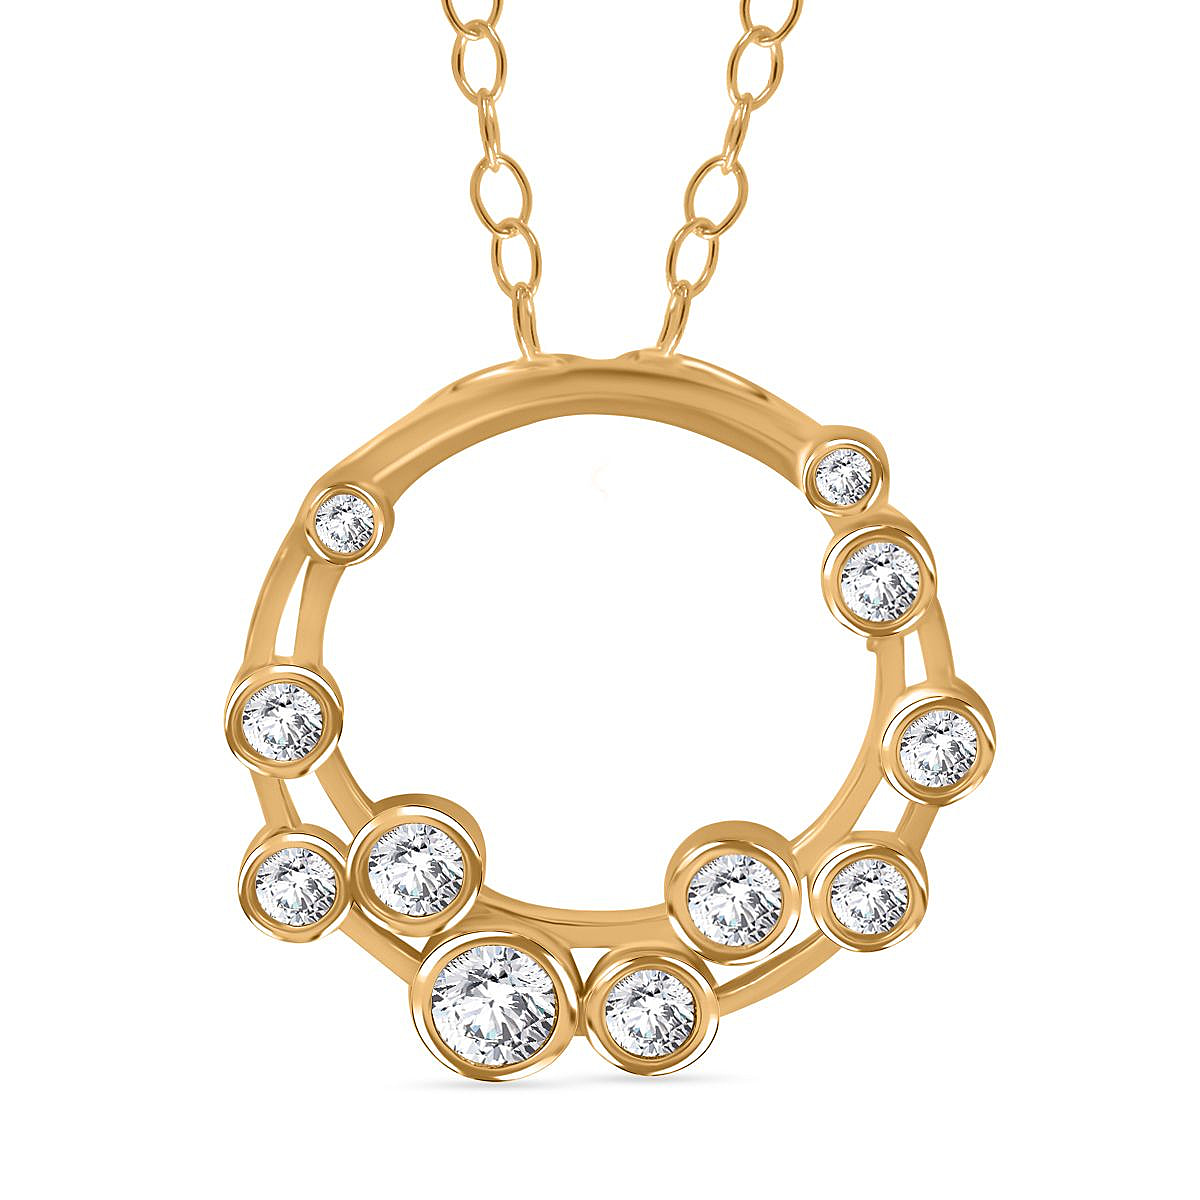 Designer Inspired - Moissanite Bubble Necklace (Size 20) in 18K Yellow Vermeil Sterling Silver